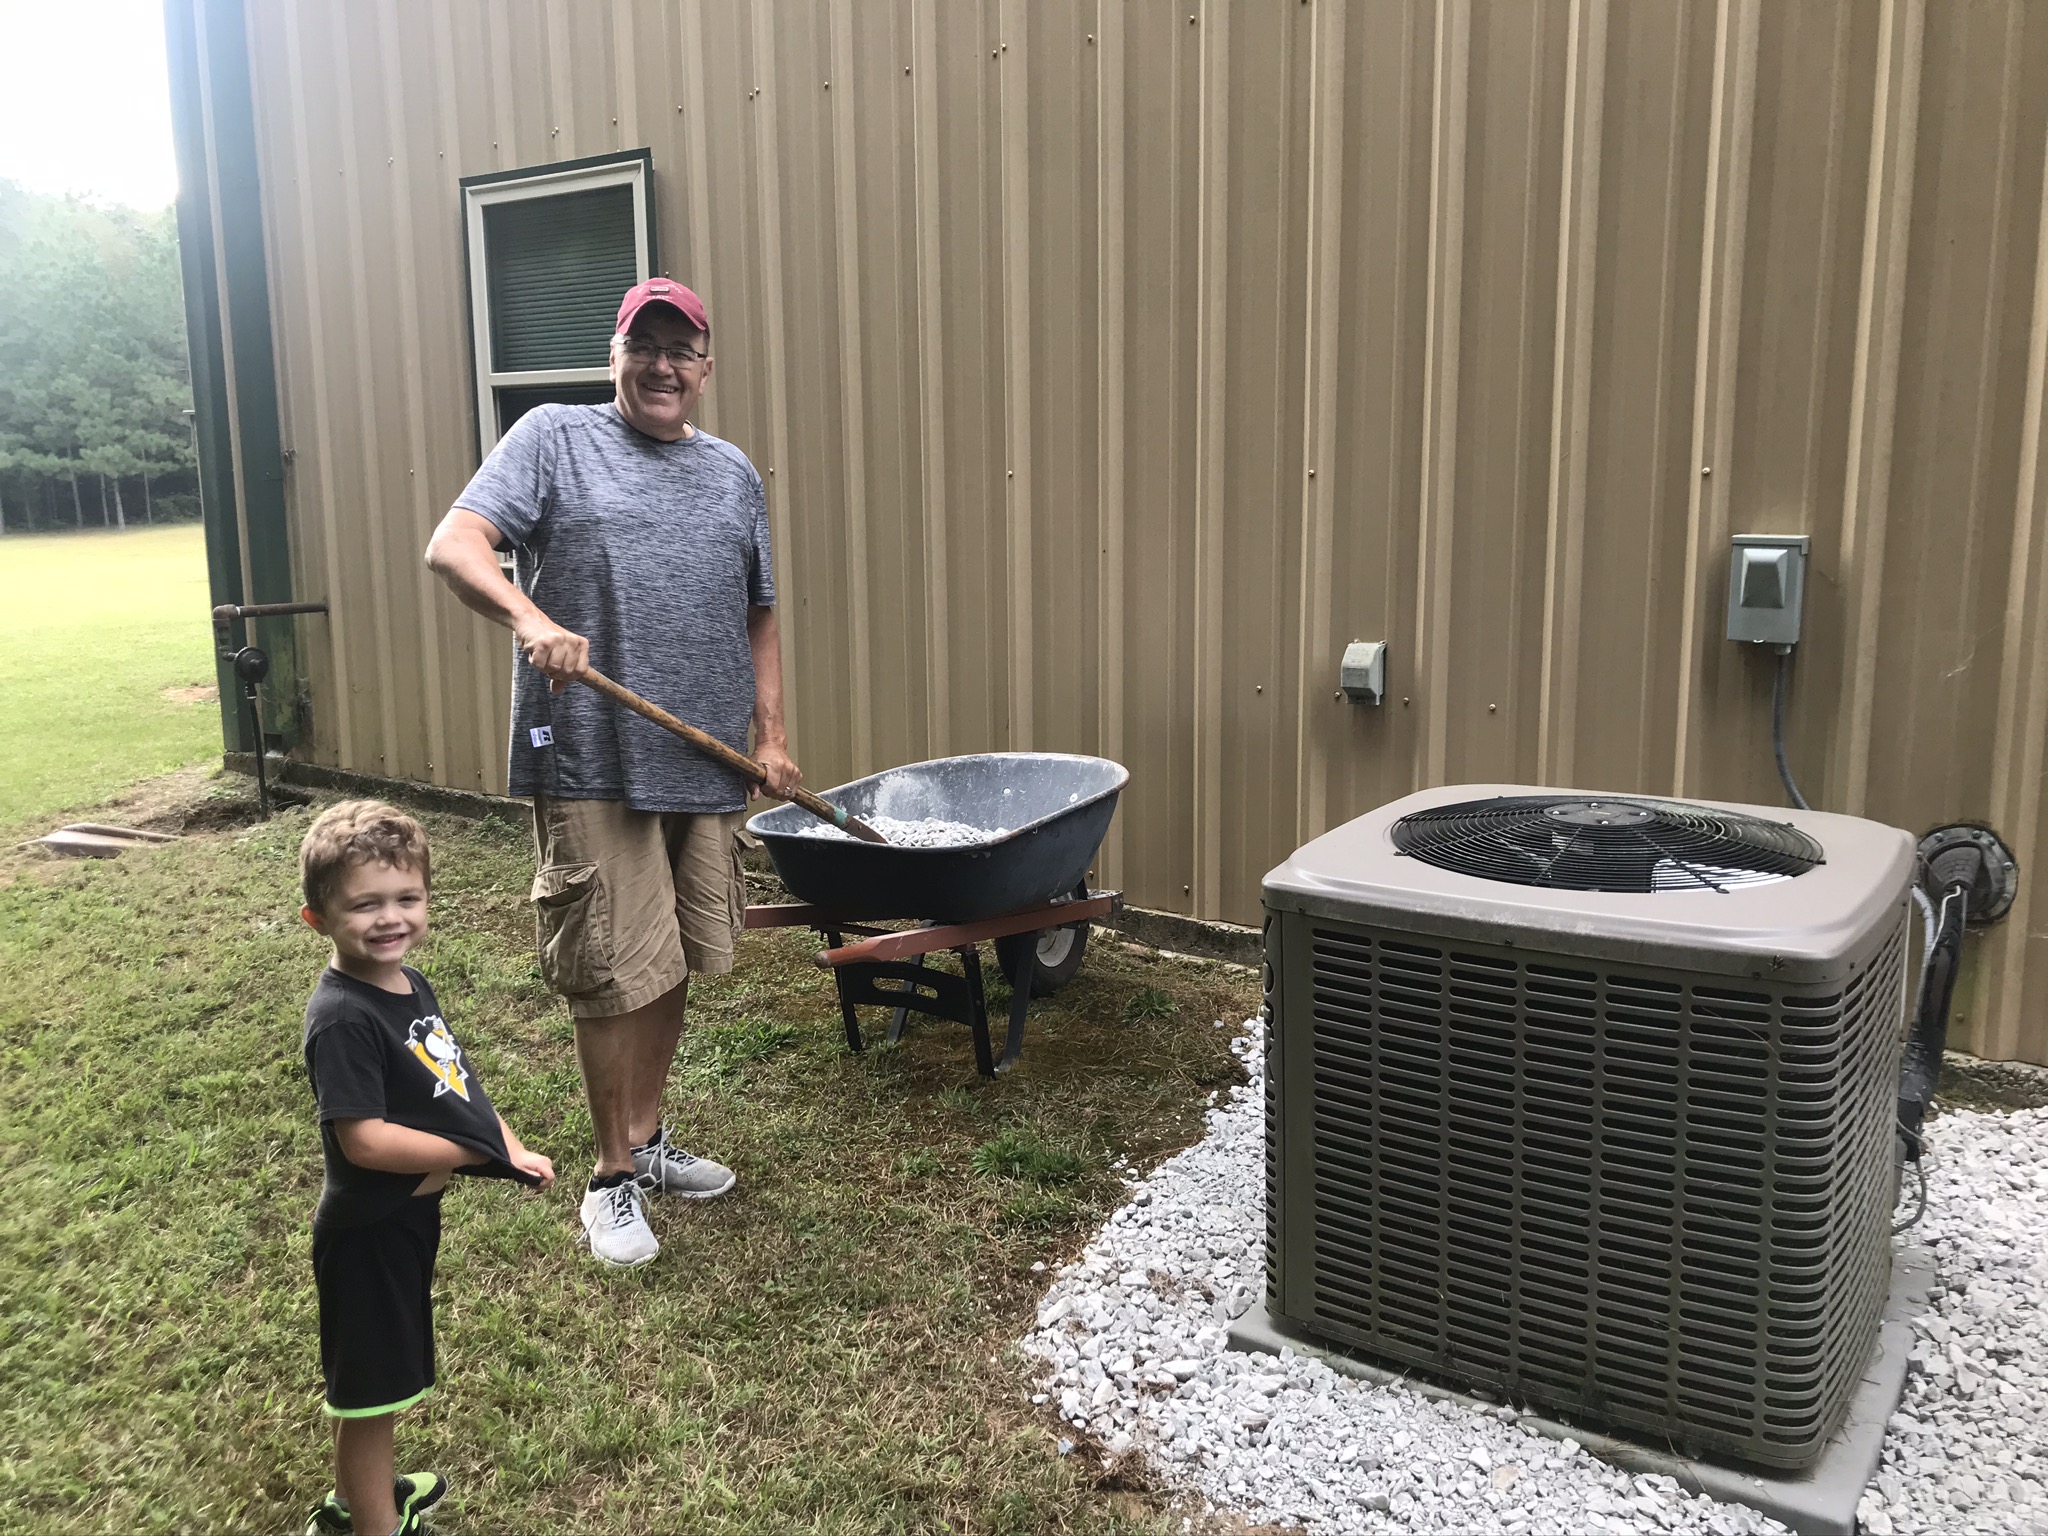 Keith "Pap" Graybill and grandson Ian spreading gravel